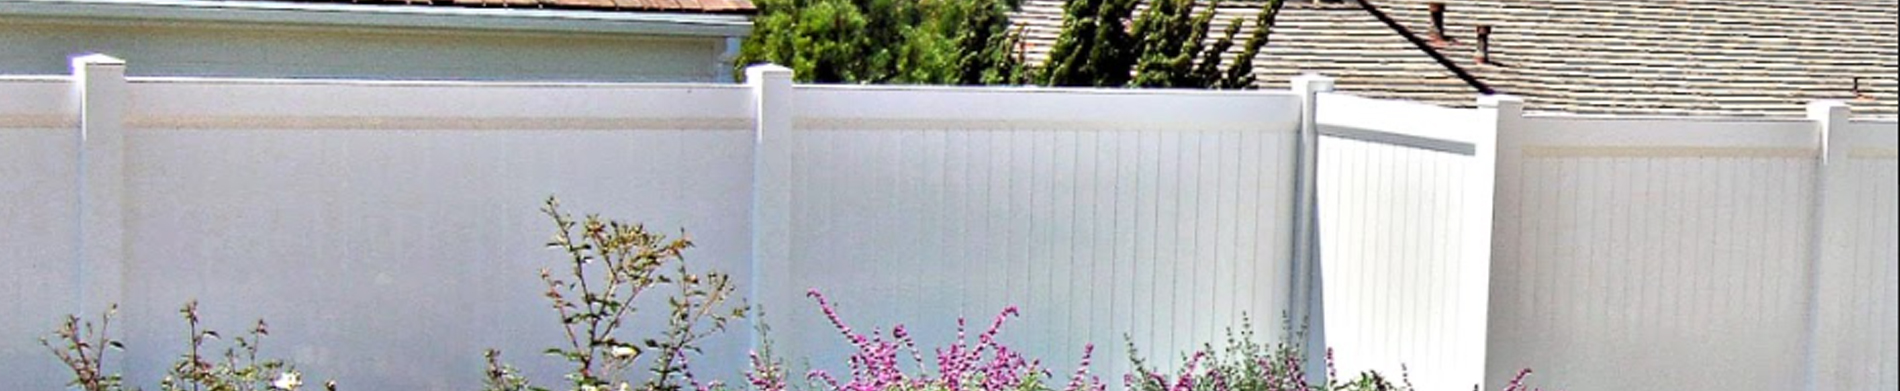 How To Choose Your Custom Vinyl Fencing Wisely?